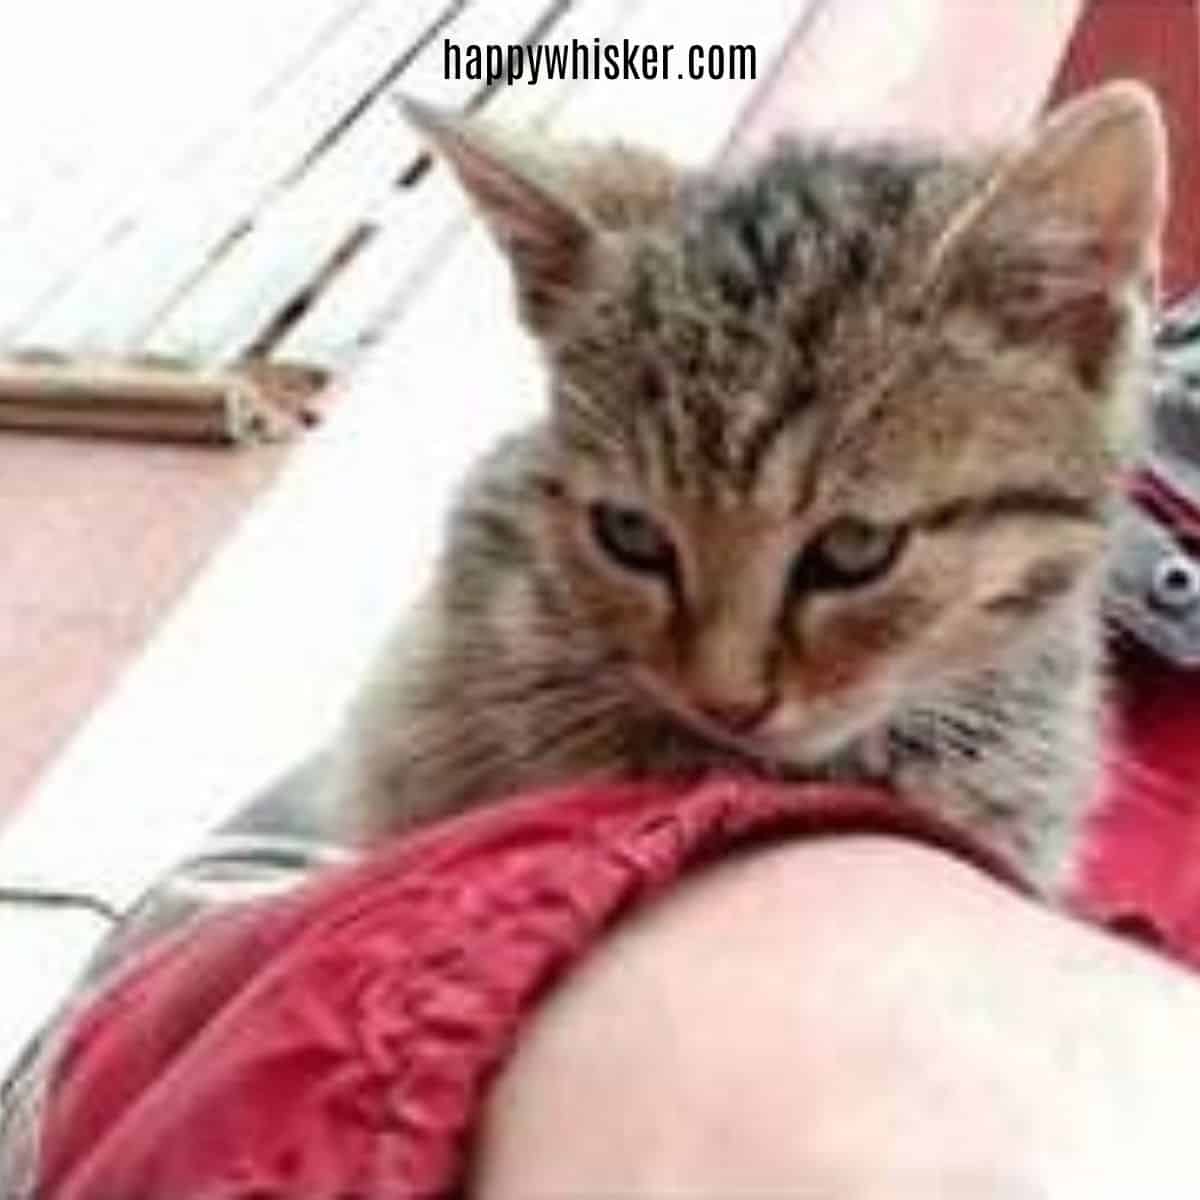 kitten showing off by climbing on owner's shoulder